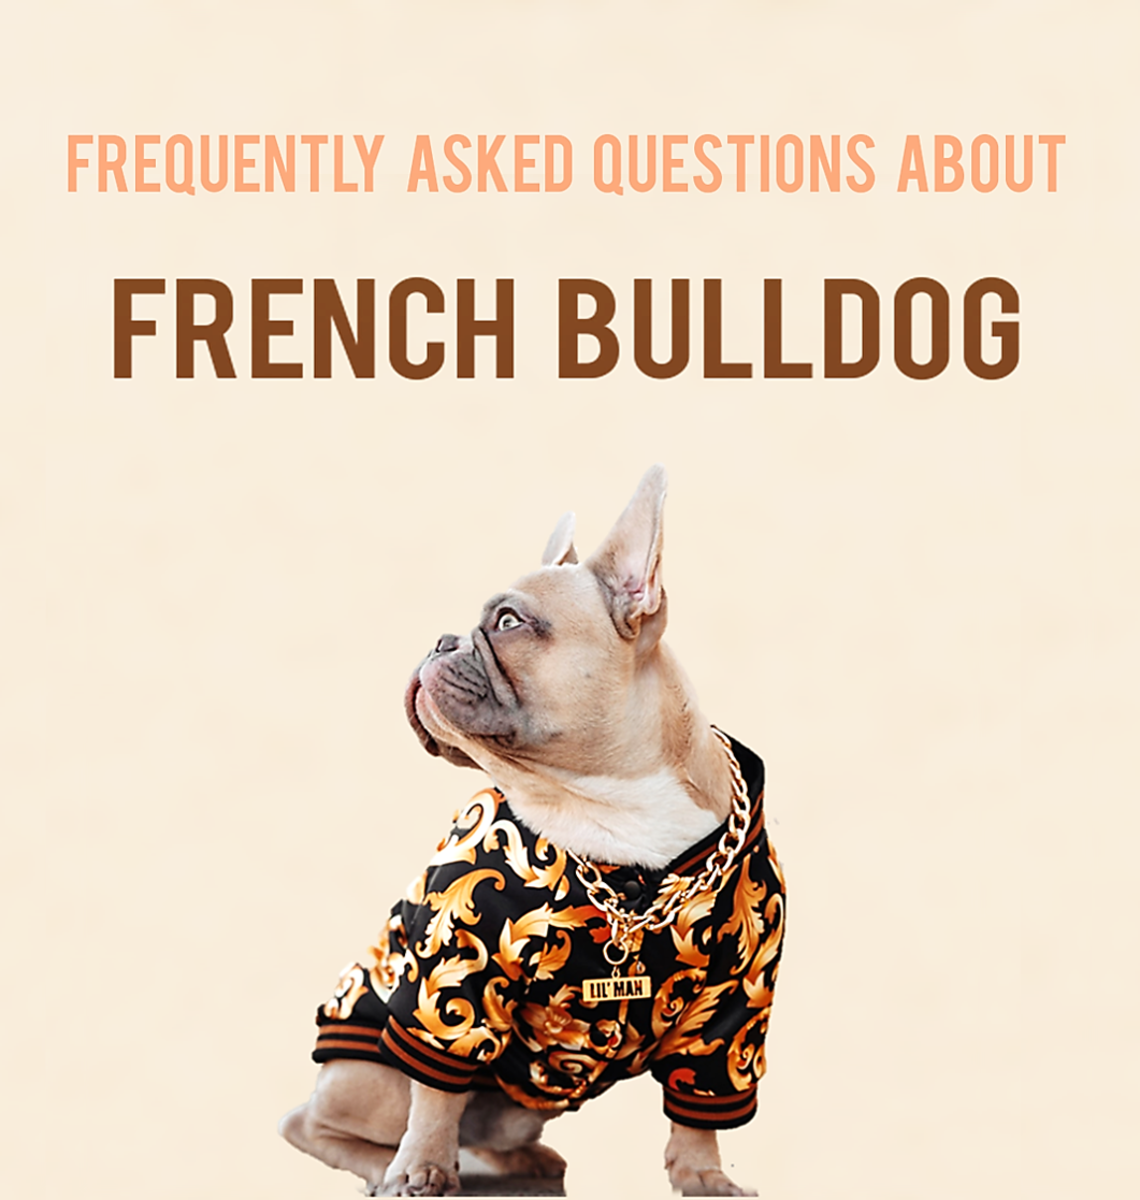 21 Frequently Asked Questions About French Bulldog